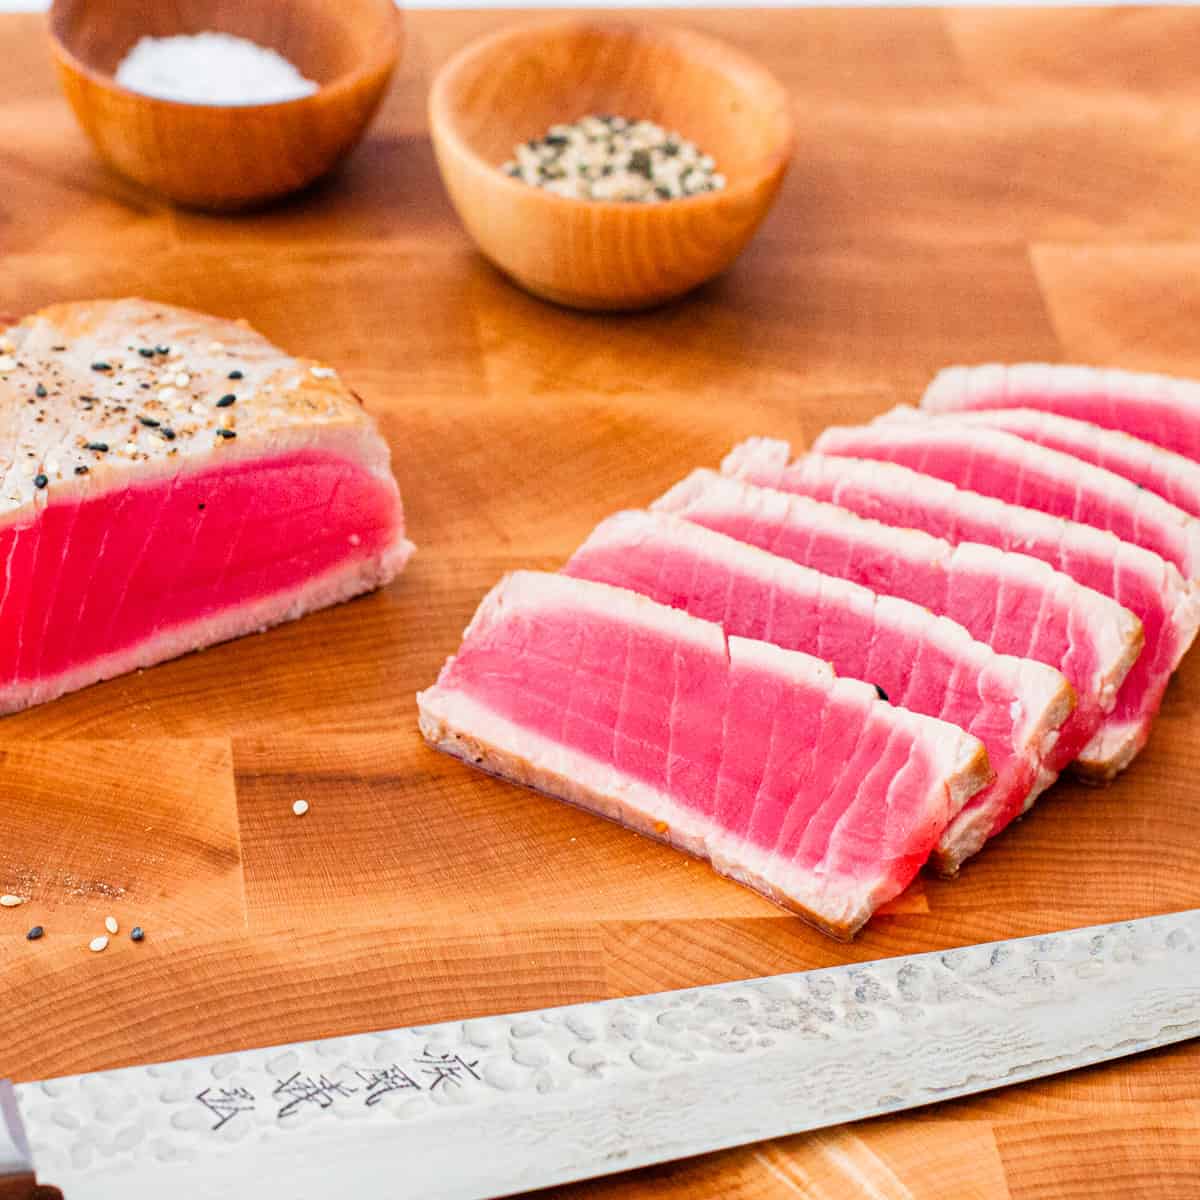 A seared tuna steak shown sliced on a large wooden cutting board with a knife in the foreground.